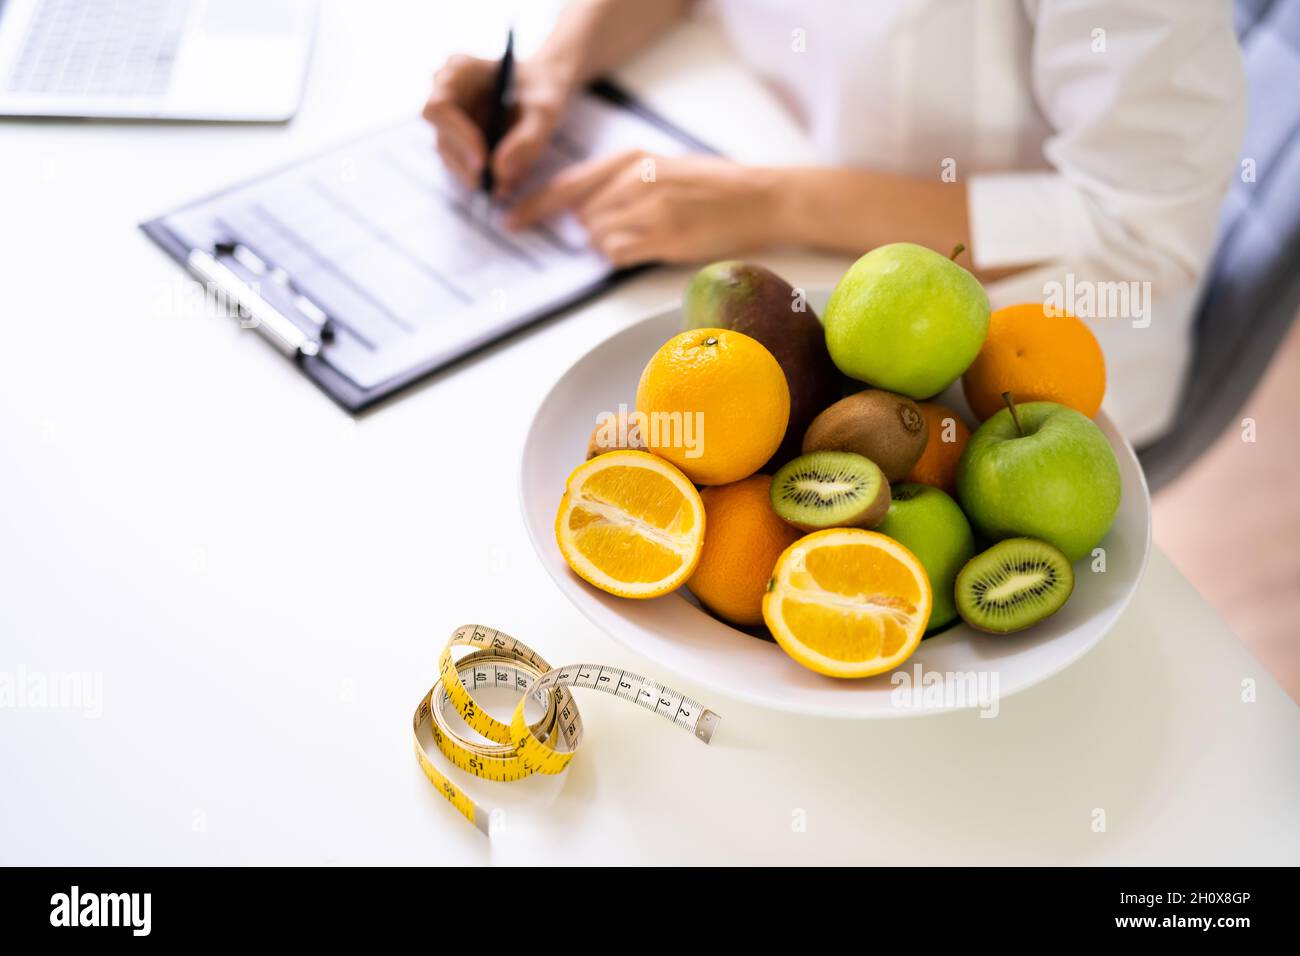 Female Nutritionist Or Dietitian In Laboratory Writing Stock Photo